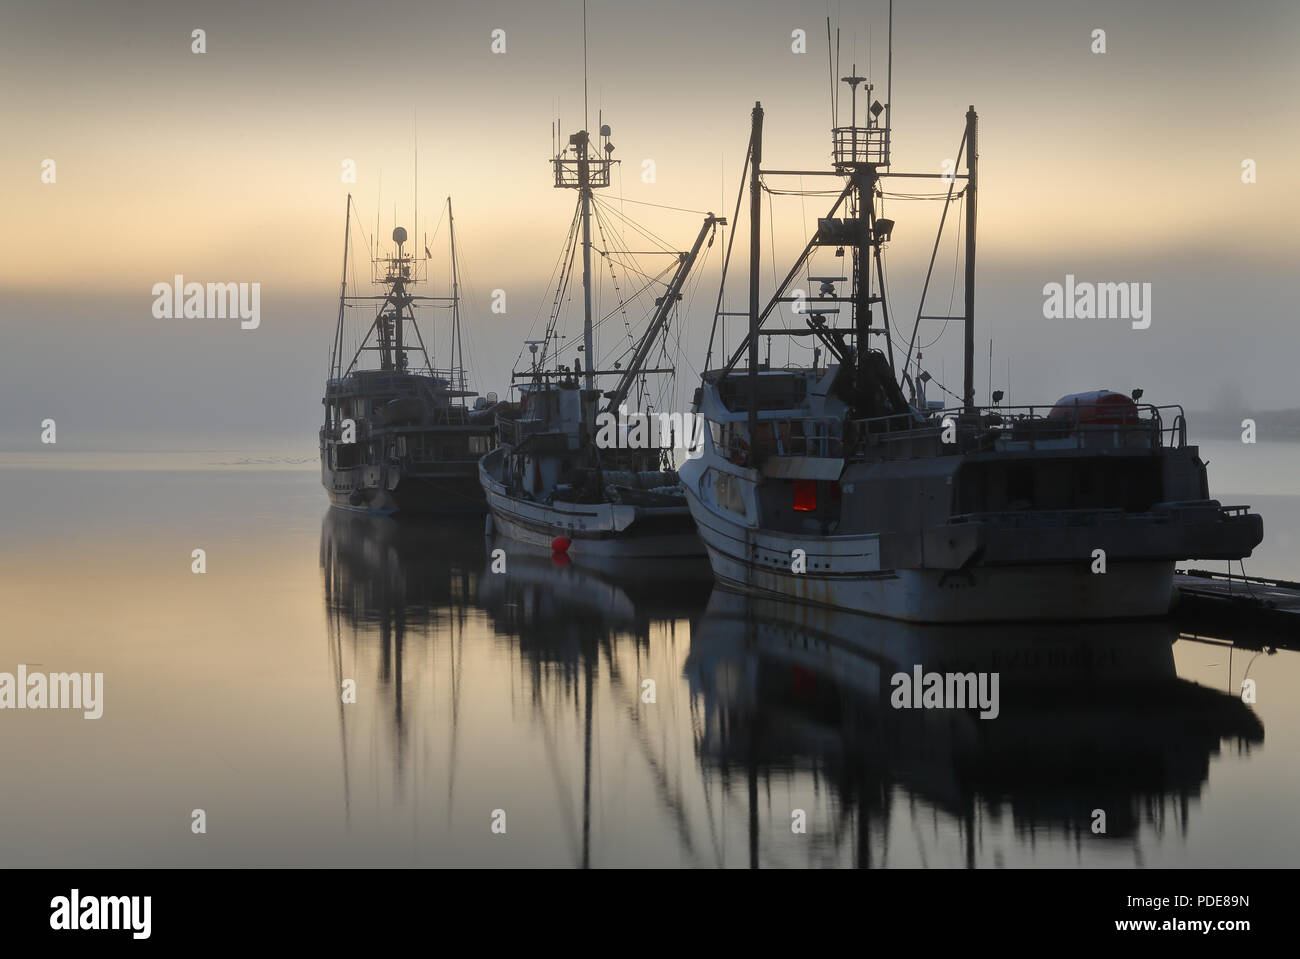 Fishboats Foggy Morning. Dawn over the harbor of Steveston, British Columbia, Canada near Vancouver. Steveston is a small fishing village on the banks Stock Photo